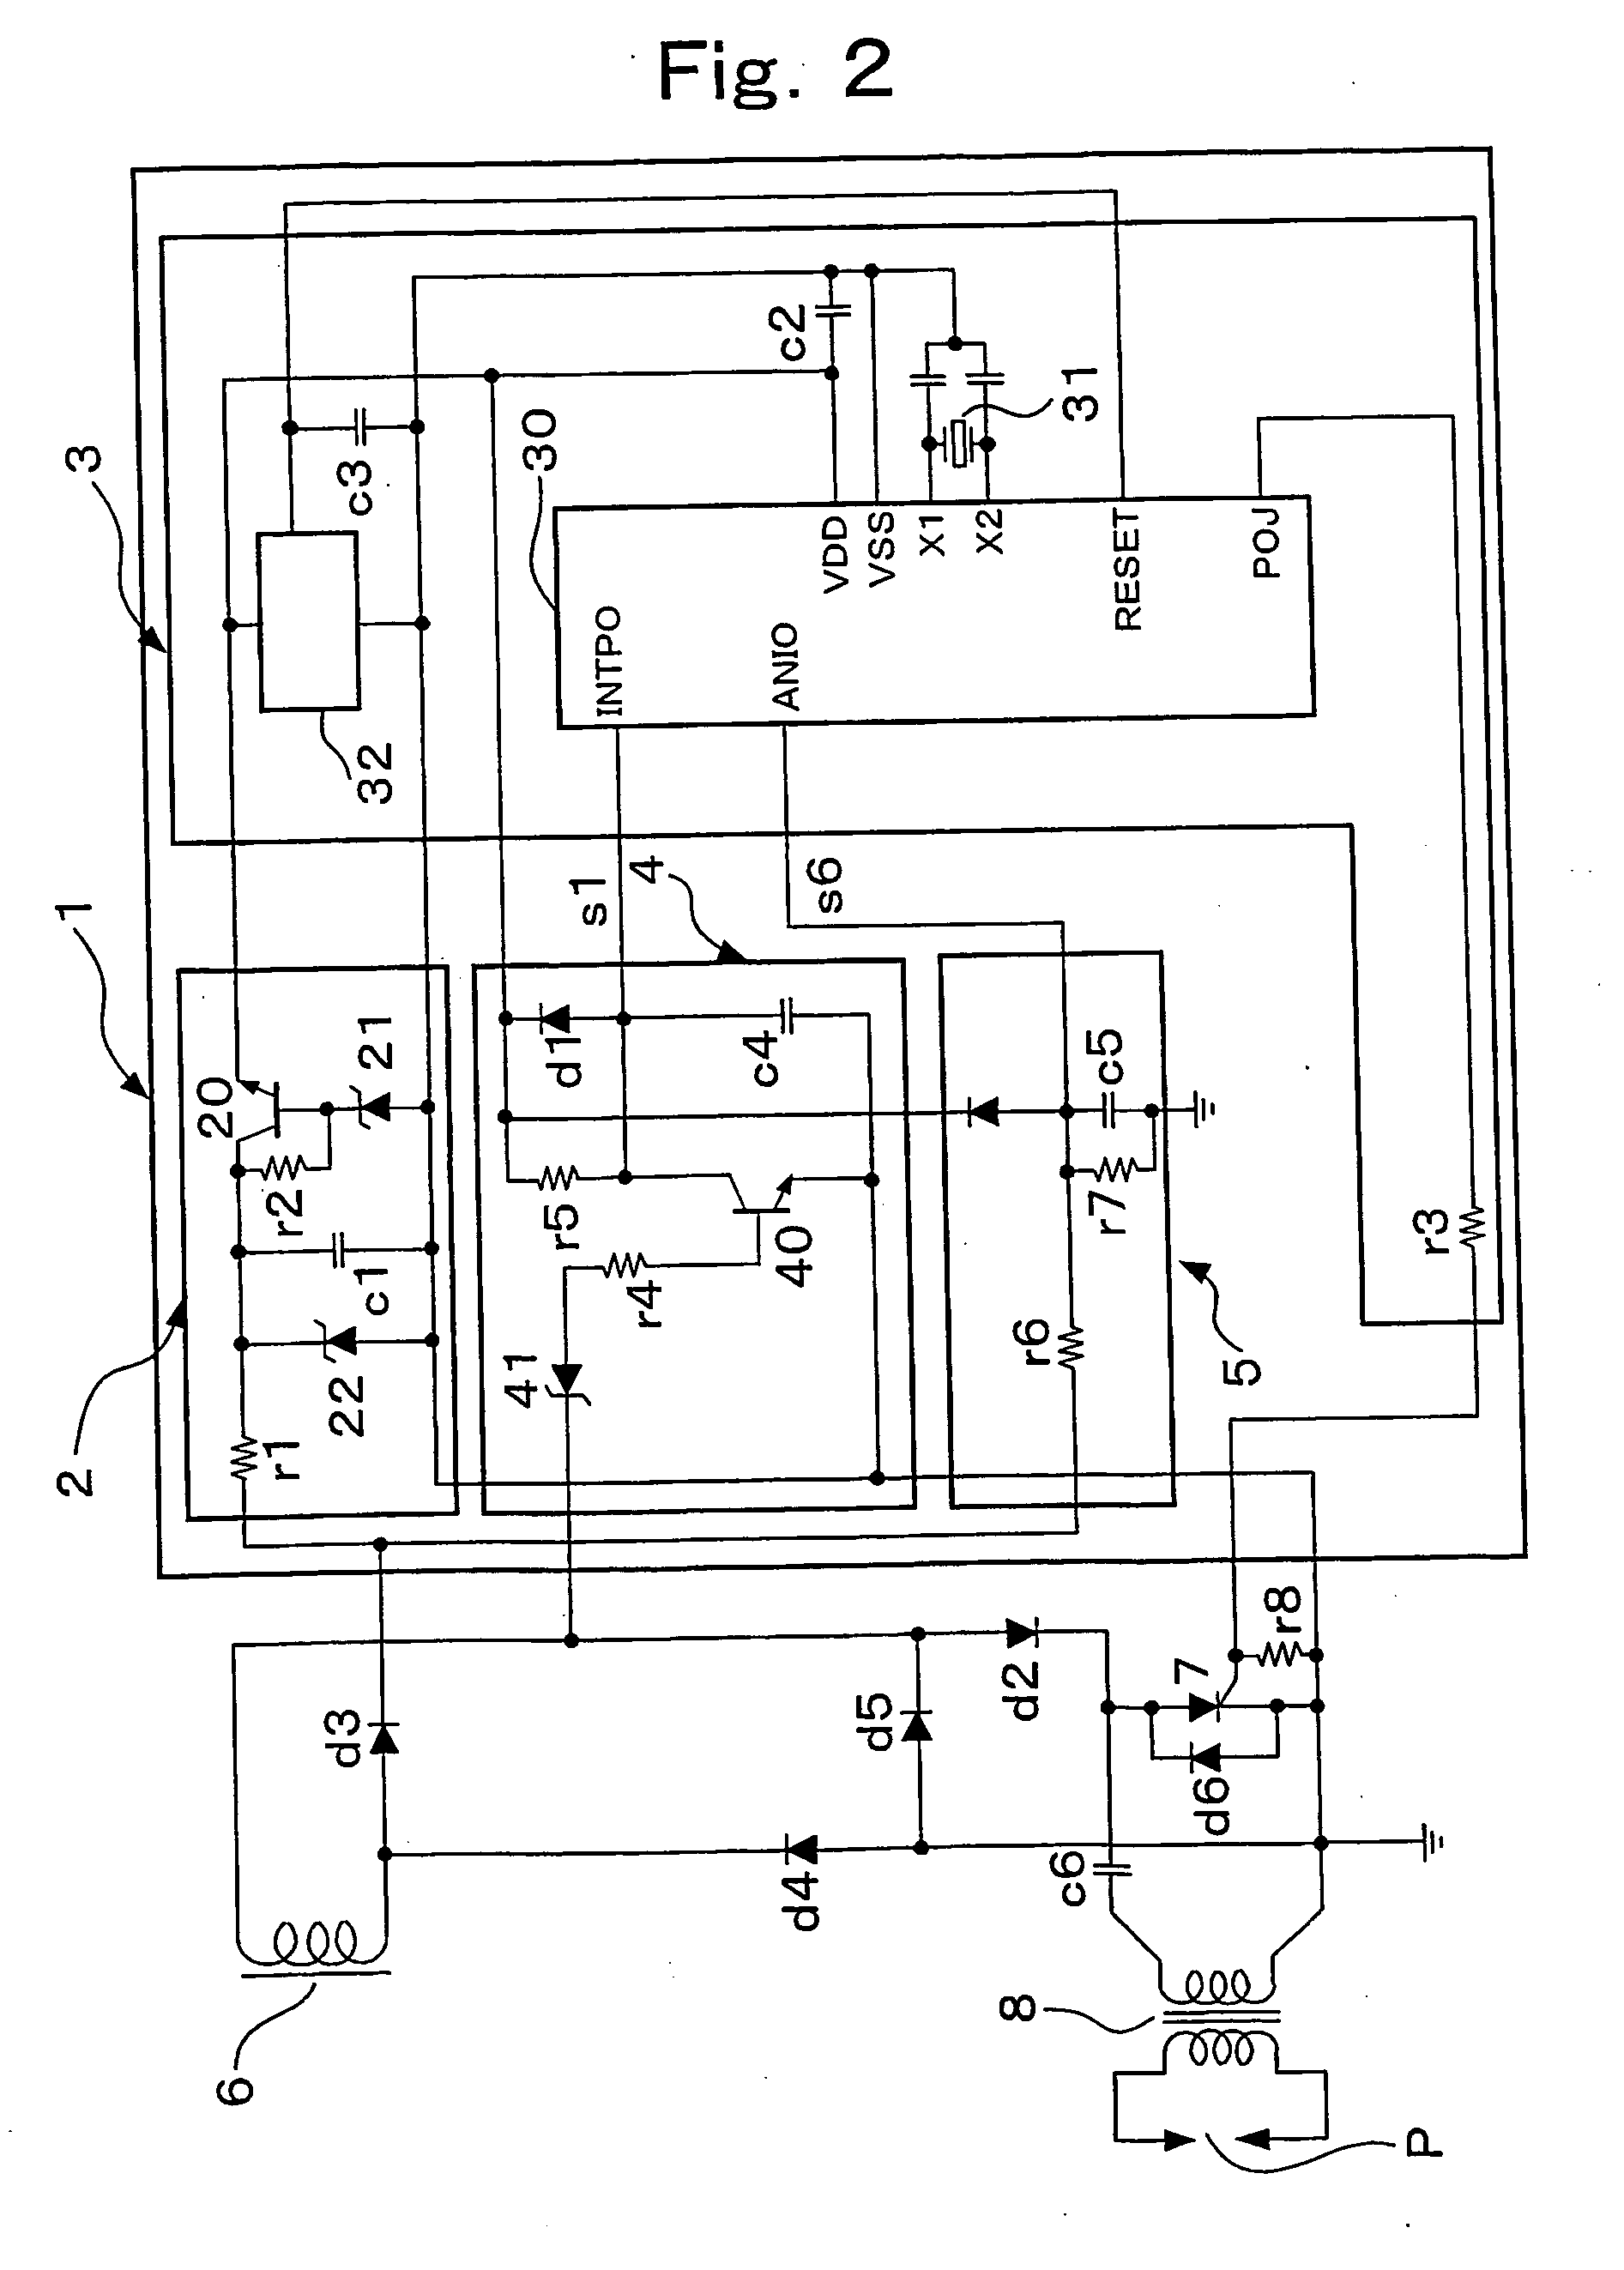 Ignition timing control method for internal combustion engine-use ignition device and ignition timing control device